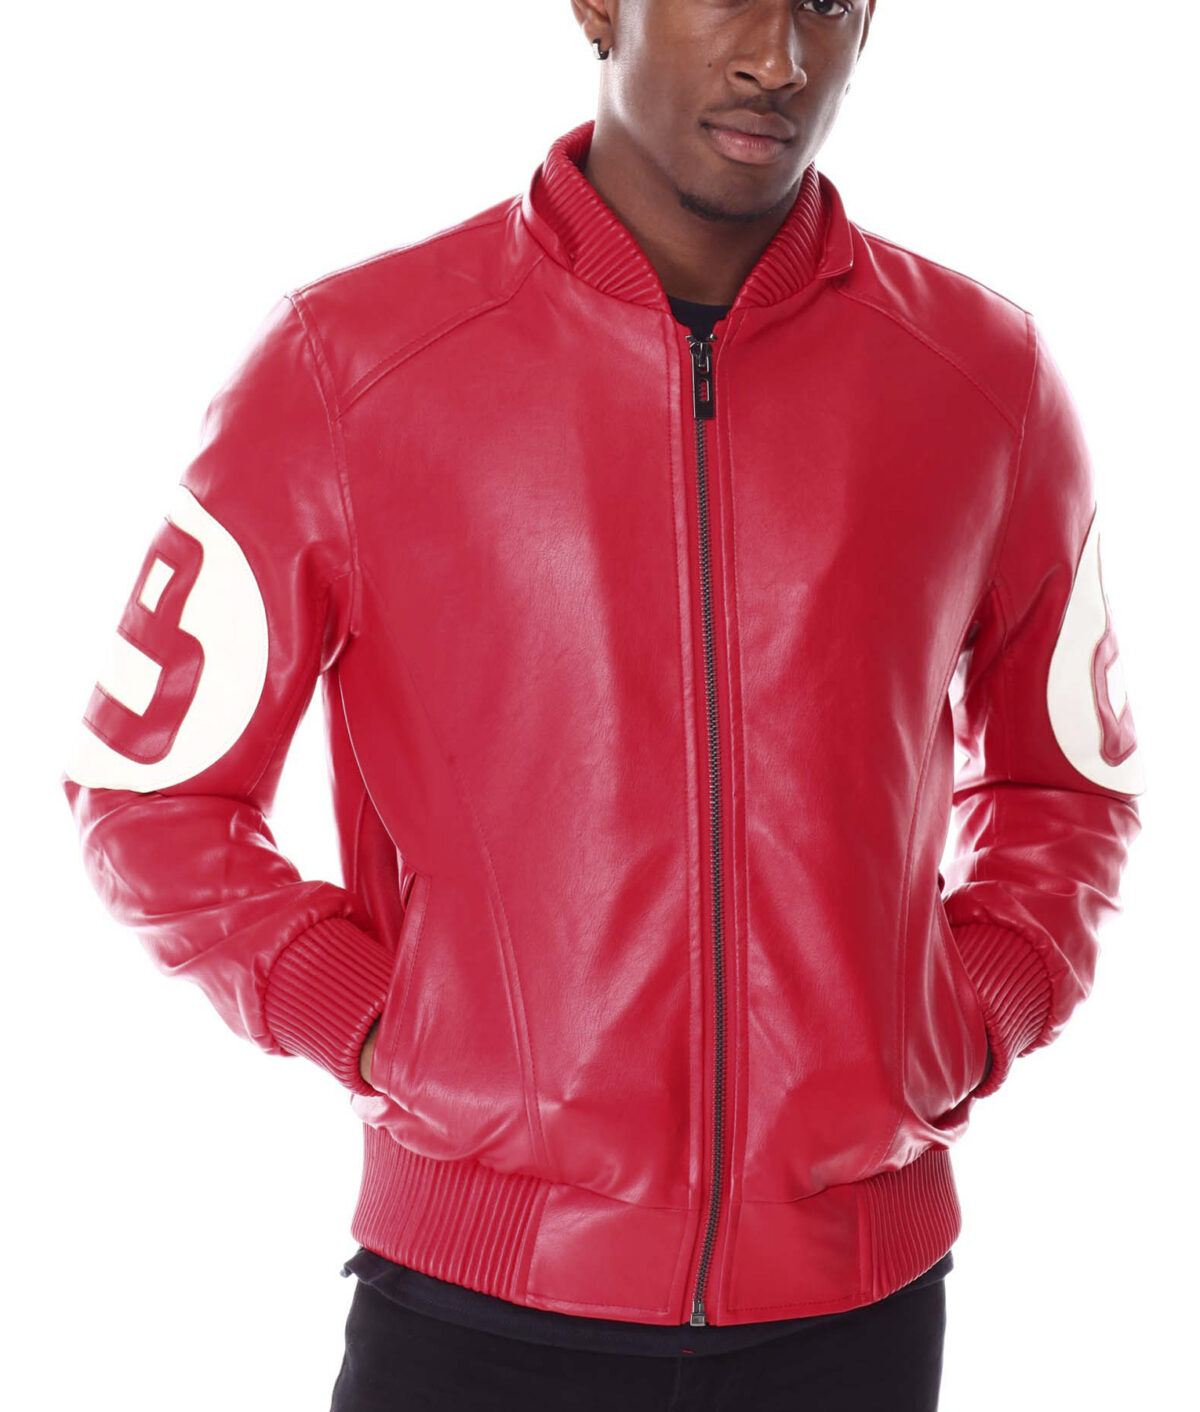 8 Ball Red Hooded Leather Bomber Jacket